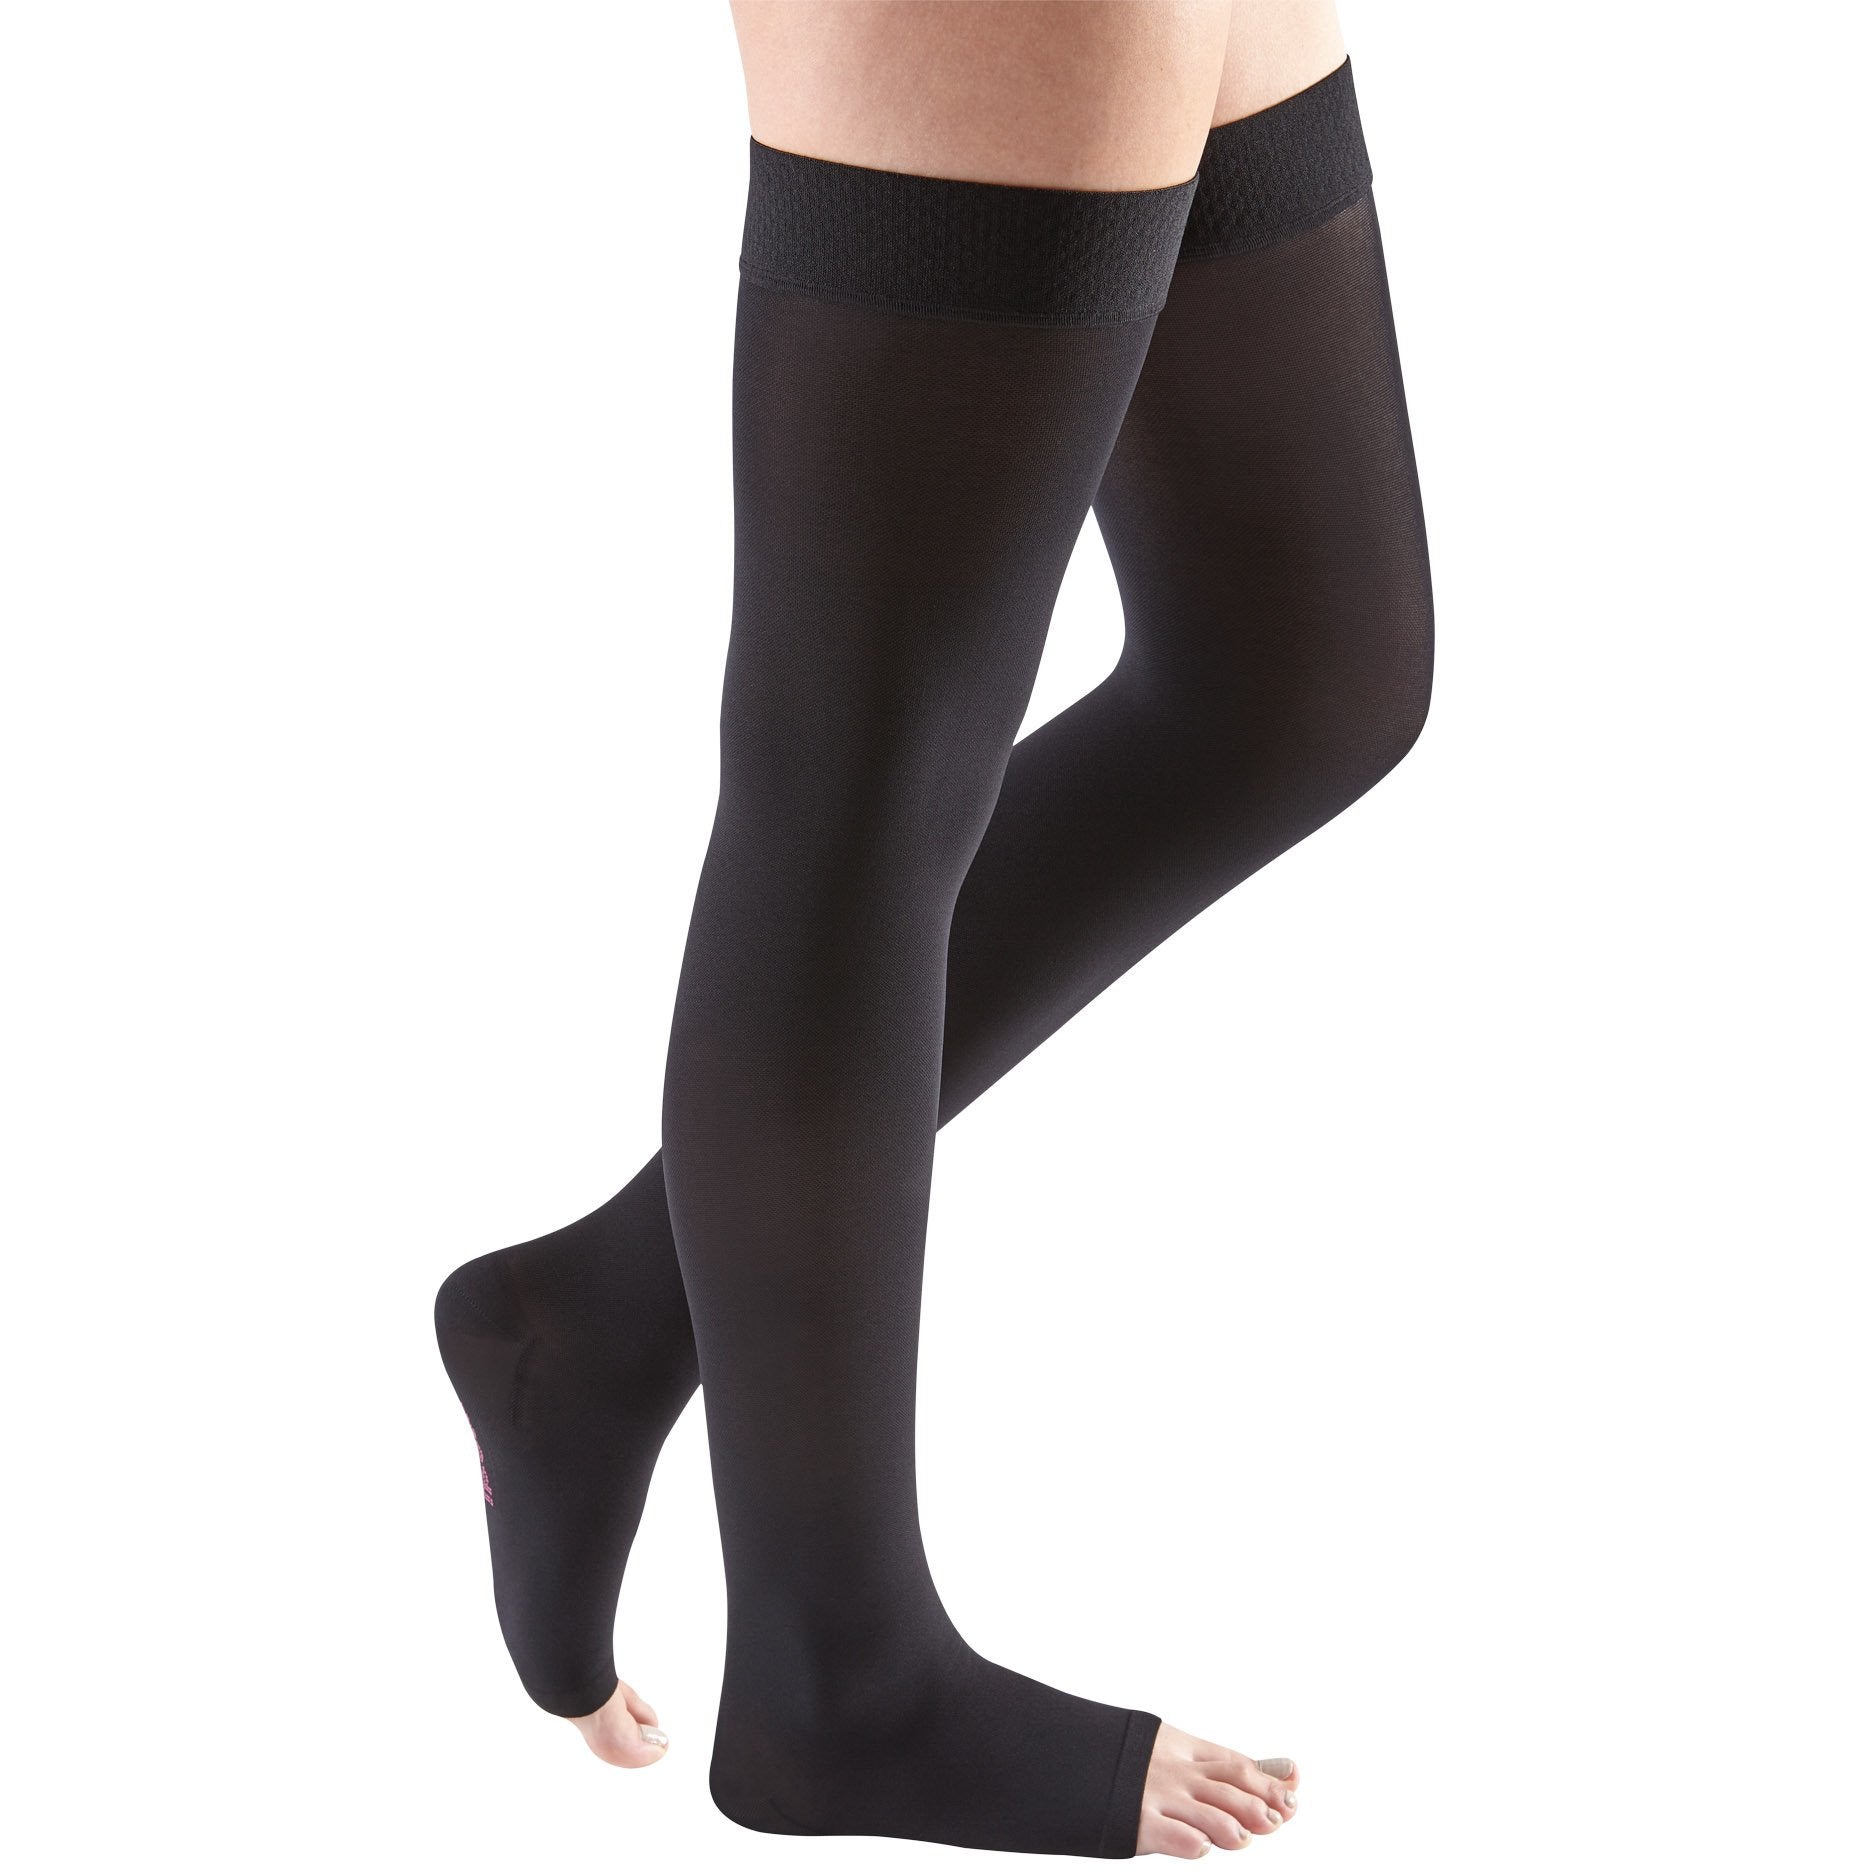 Womens Thigh High Compression Stockings (15-20 mm Hg Compression)